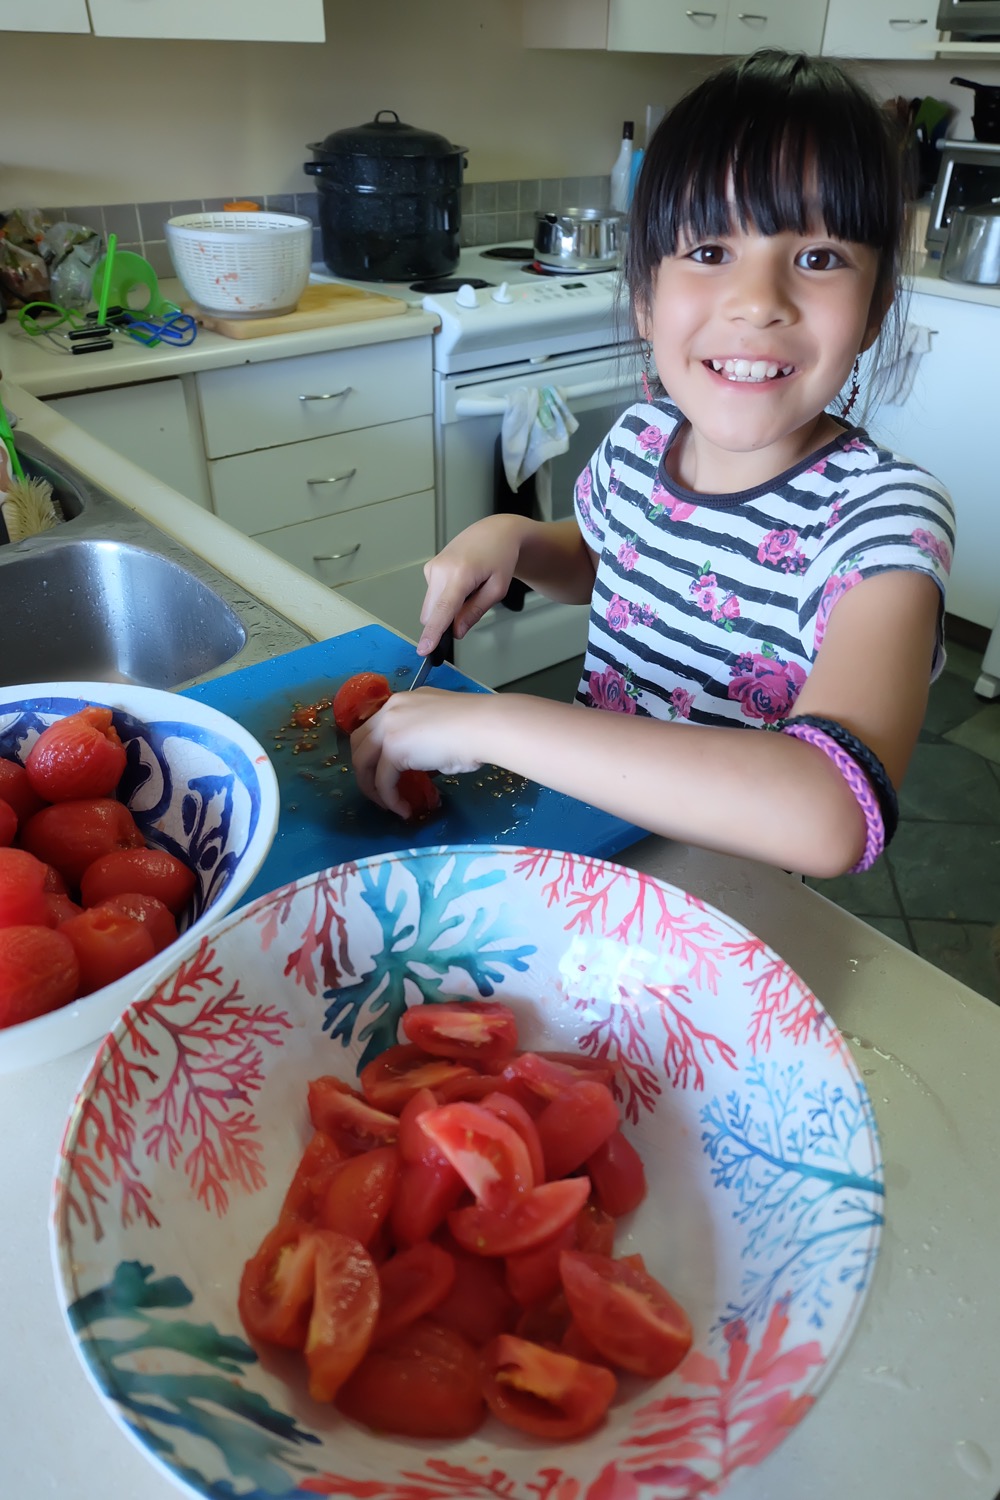 Get canning with your family this summer! We're sharing our top tips for canning with kids along with step by step photos and instructions for how to make our Easy Italian Herb Canned Tomatoes Recipe! We take all the intimidation out of canning so you can pass this handmade art along to your kids! #Canning #Recipe #Tomatoes #KidsCooking